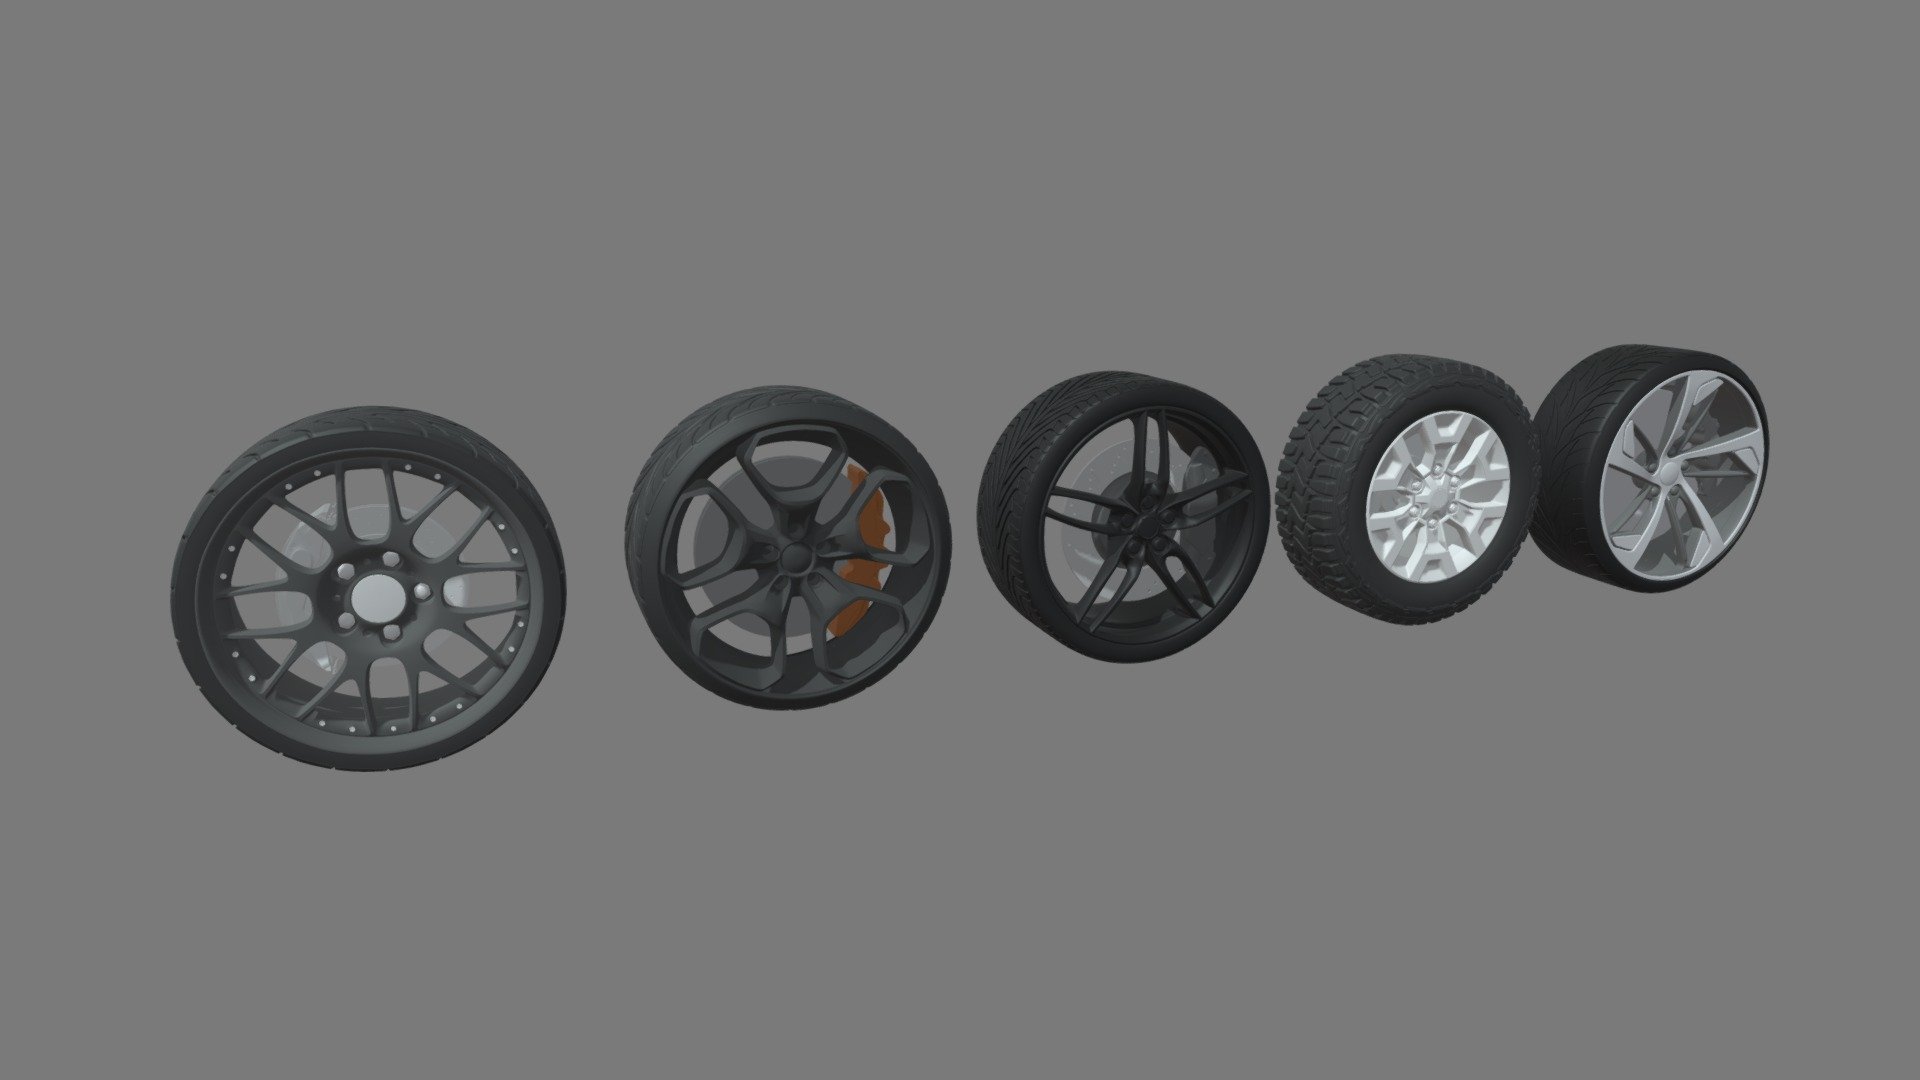 This model contains a Rim Pack modeled in Autodesk Maya 2018 based on real cars. If you need to know the brands contact me.

There are 5 different kind of wheels with different colours, froms, and sizes separated in the outliner as 5 different object, Rim 1,2,3,4 and 5. The UV's are automatic with a lot of different materials, just colours, NO TEXTURE UV.

Don't doubt on contacting me so we can negociate whatever you want. If you need any kind of help contact me or indicate whatever you need or want.

If you like the model please give me some feedback, I would appreciate it. If you experience any kind of difficulties, be sure to contact me and i will help you. Sincerely Yours, ViperJr3D - Rim Pack 01 - Buy Royalty Free 3D model by ViperJr3D 3d model